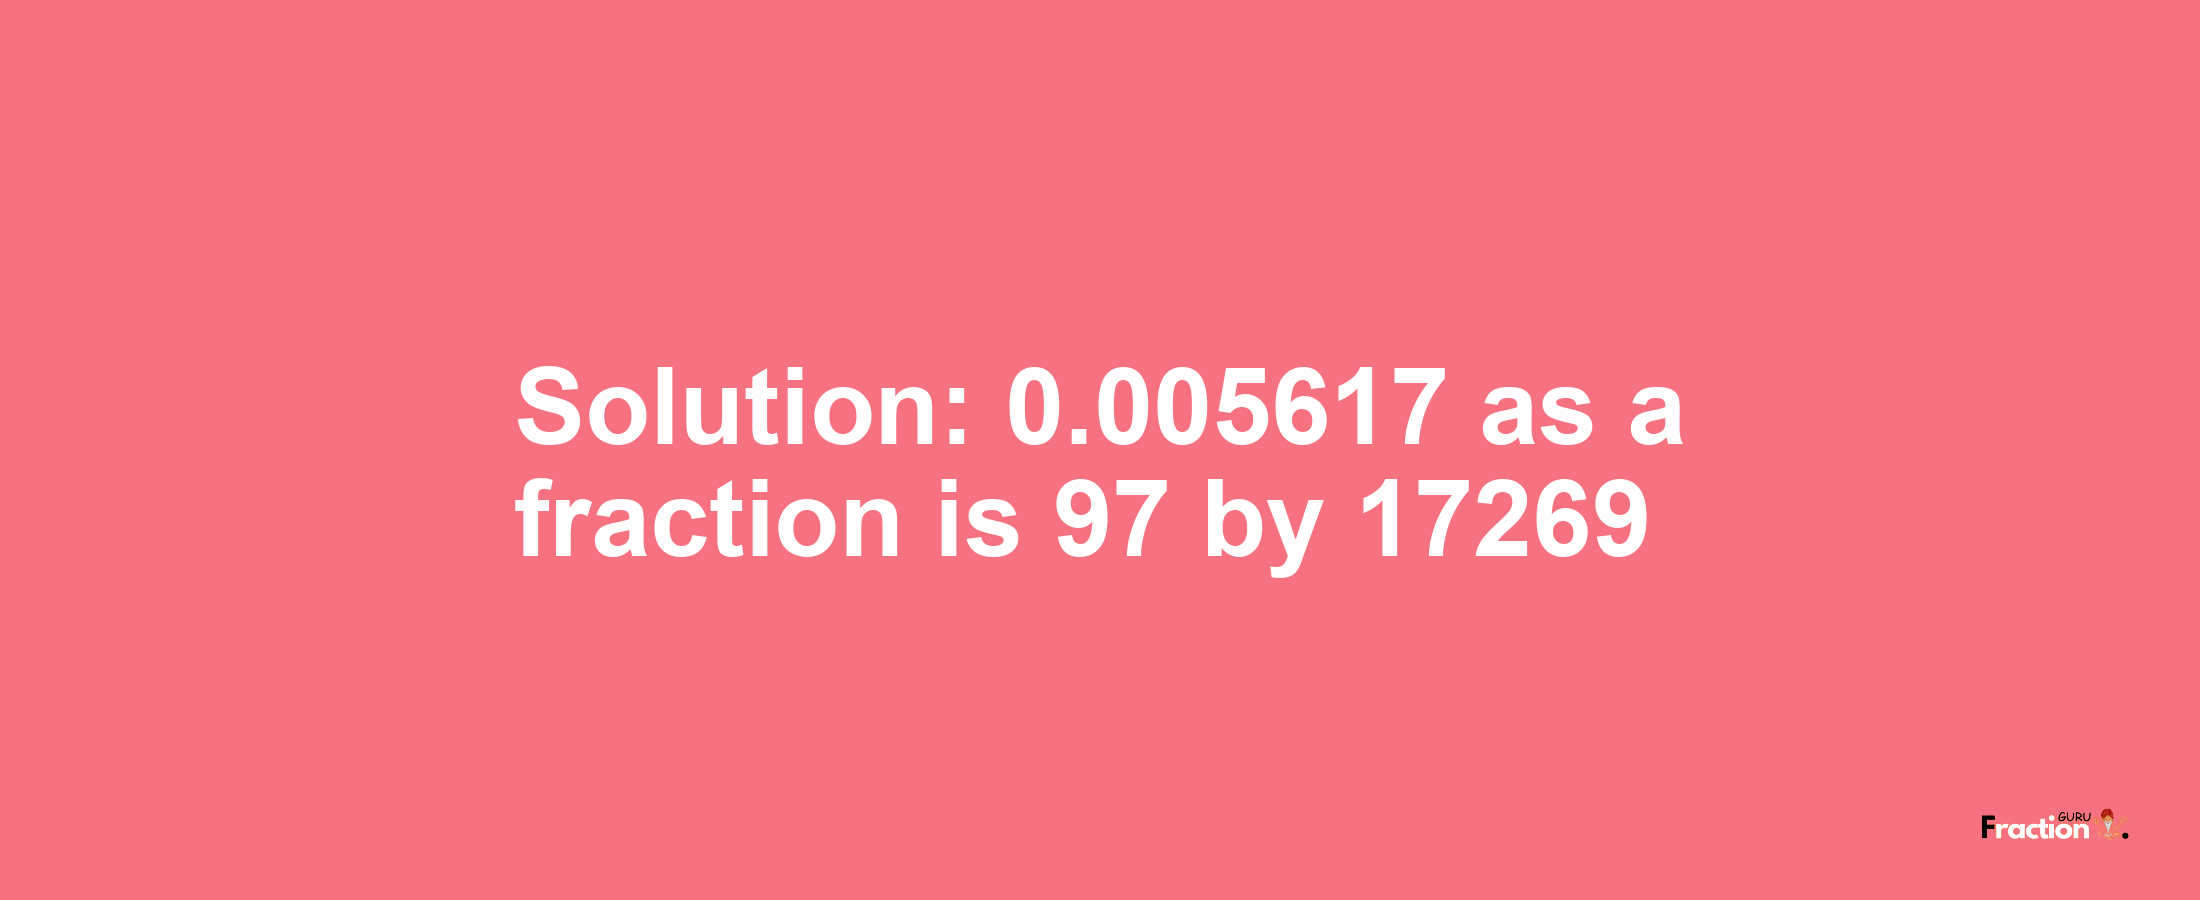 Solution:0.005617 as a fraction is 97/17269